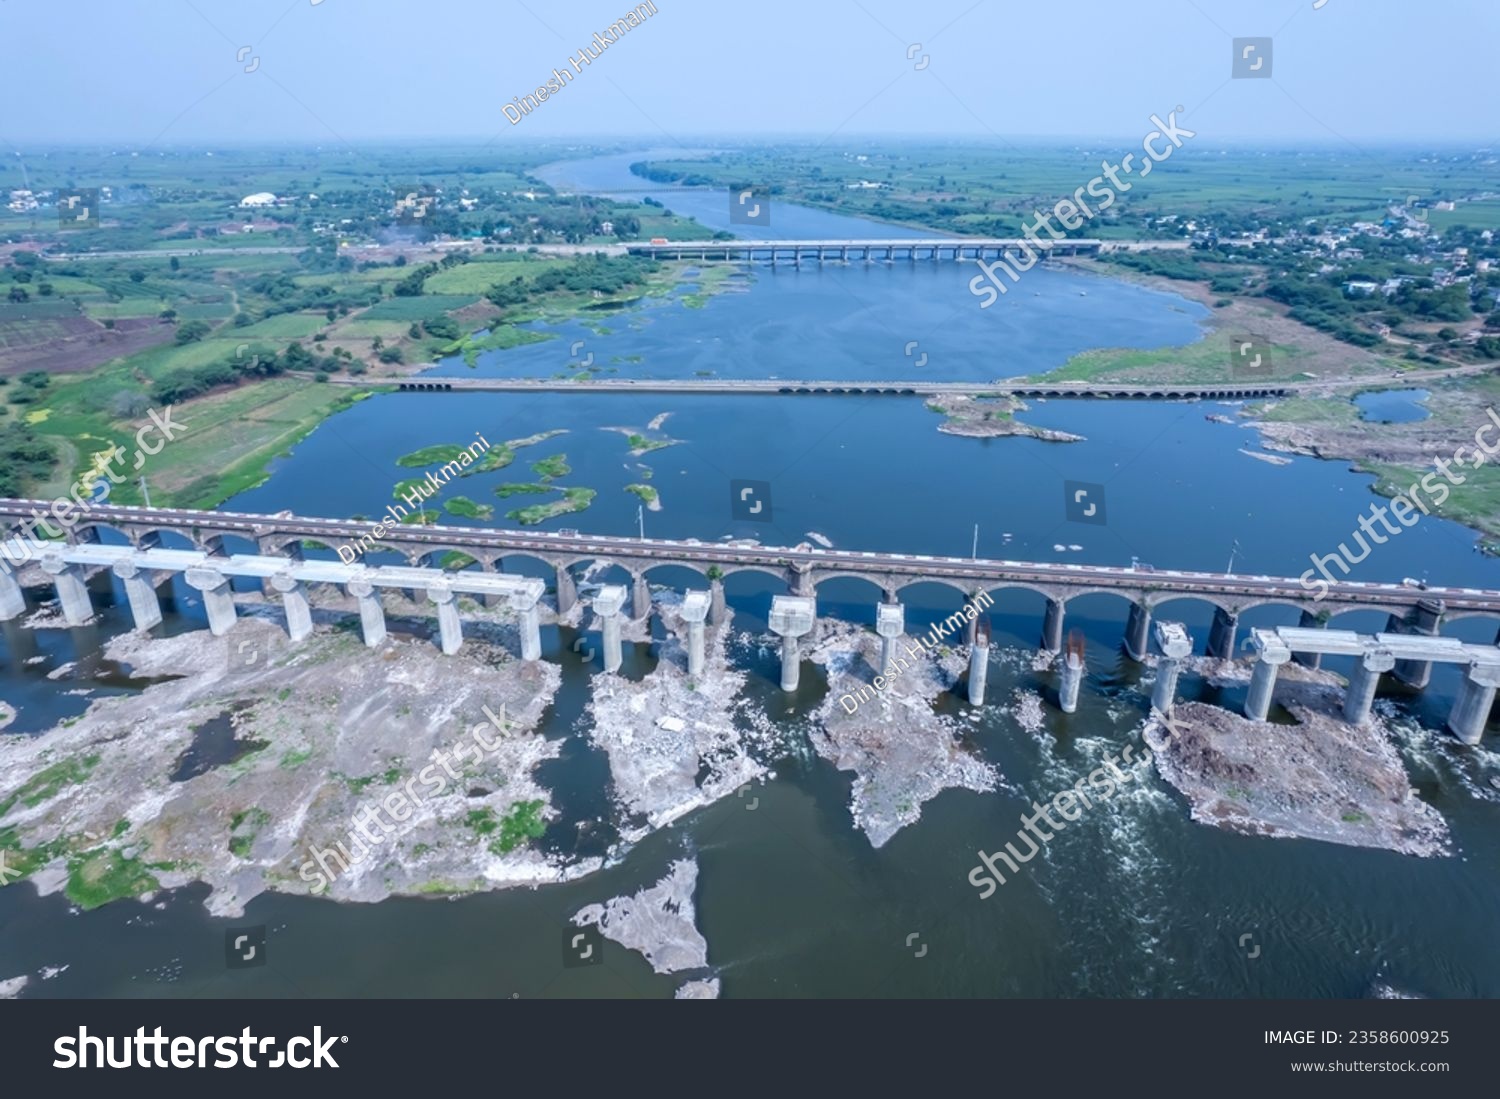 Aerial footage of the River Bhima and surrounding landscape including bridges at Daund India. #2358600925